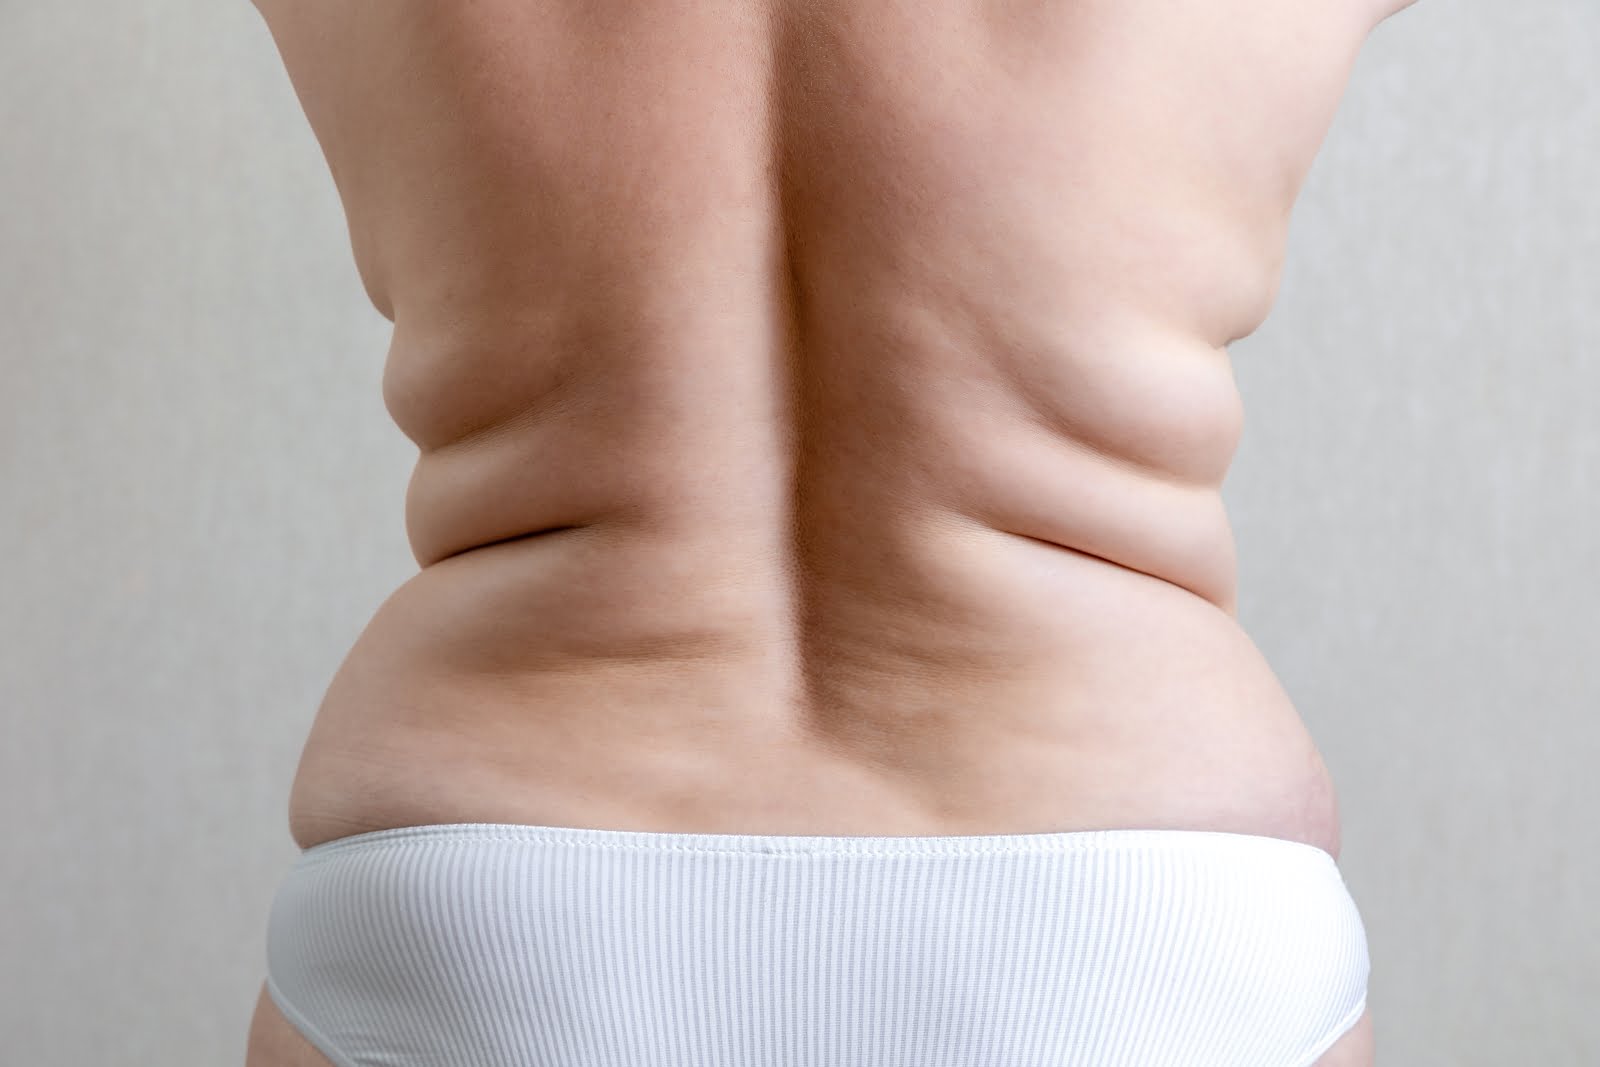 How to get rid of back fat rolls and loose skin on your stomach